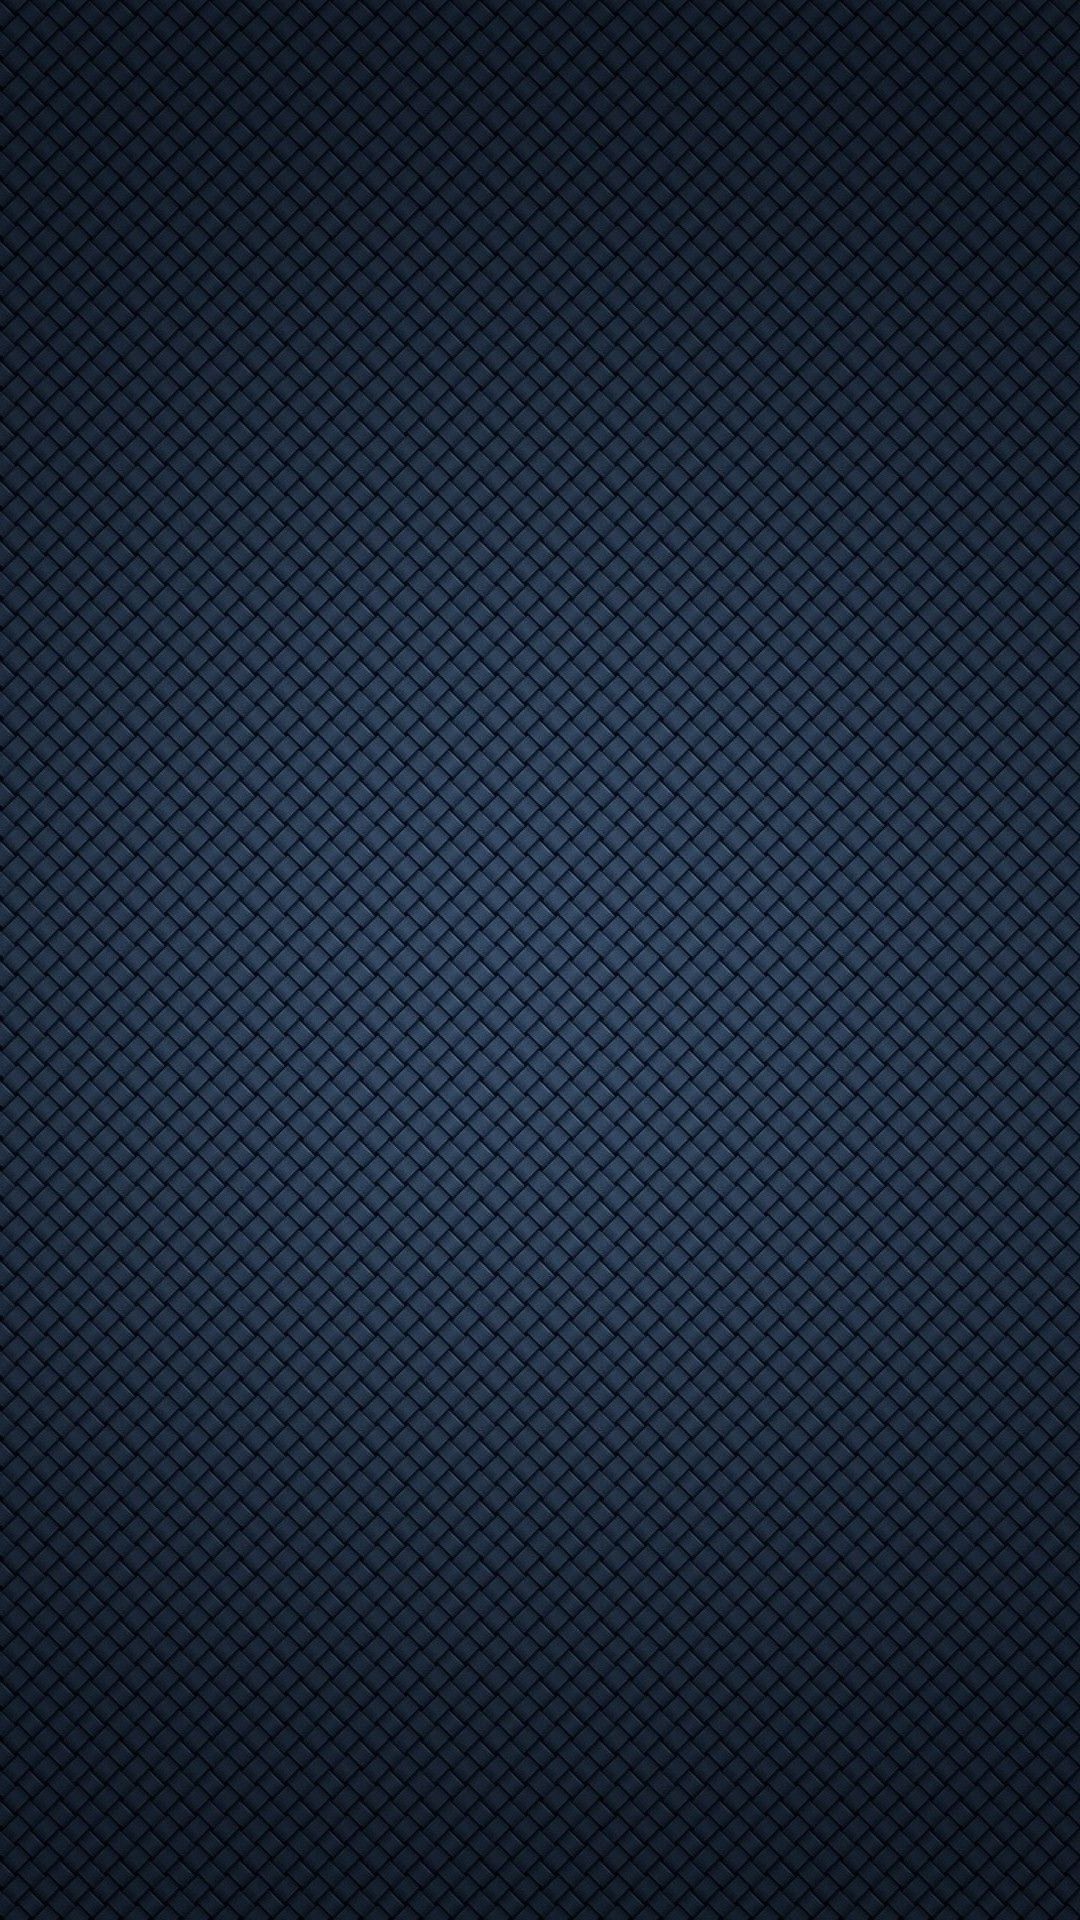 Android Blue Background. Android Wallpaper, Android Phone Wallpaper and Android Smartphone Wallpaper